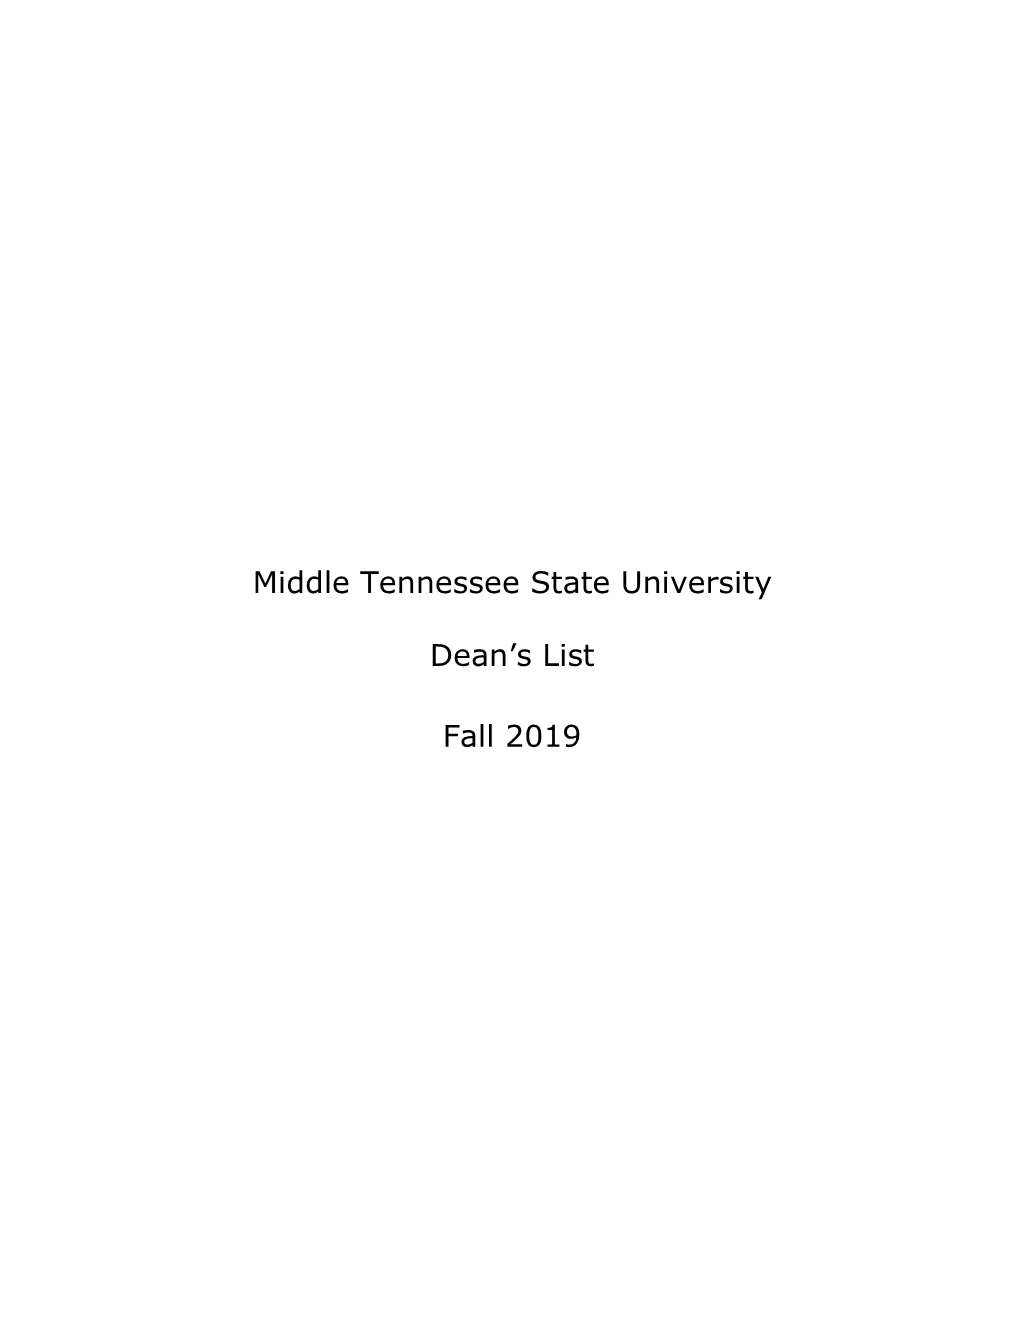 Middle Tennessee State University Fall 2019 Dean's List